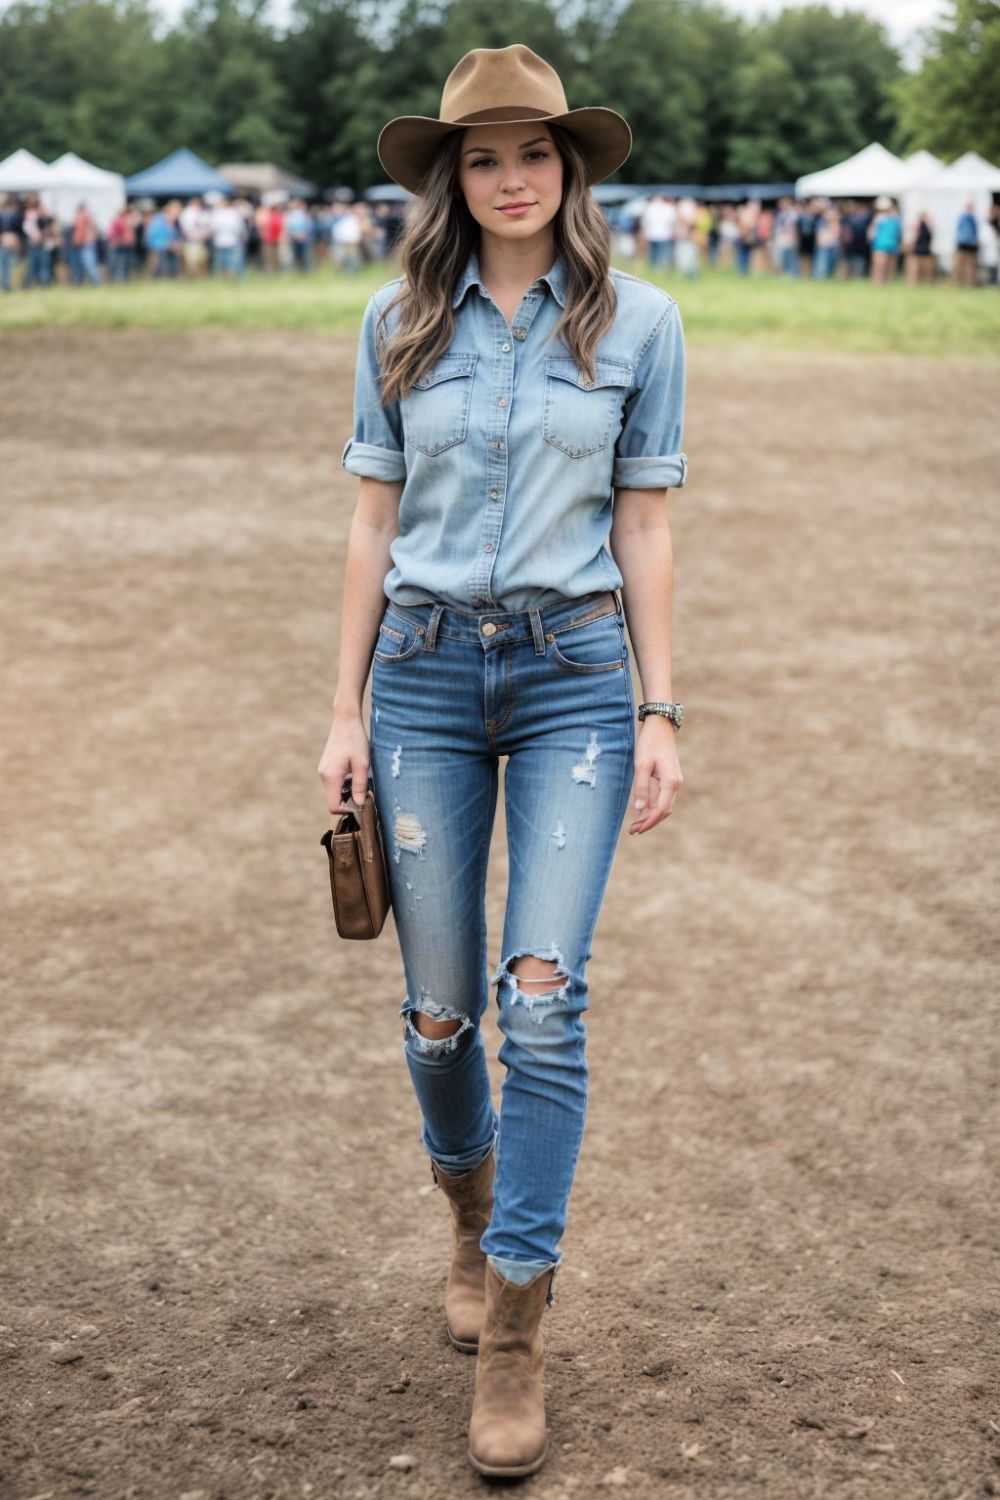 classic denim and boots